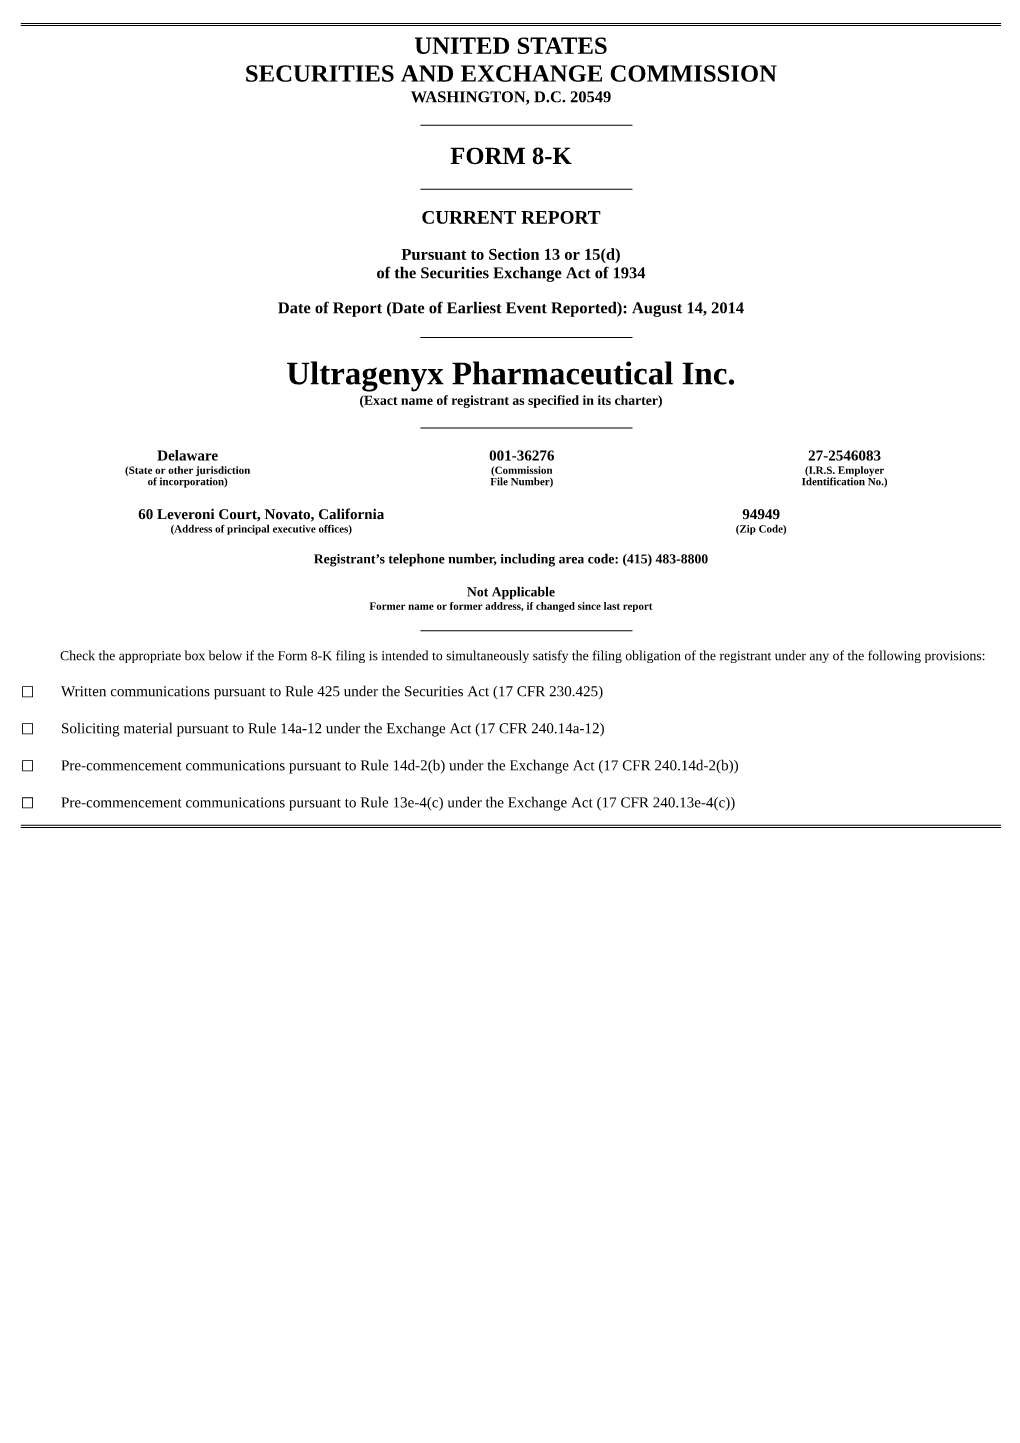 Ultragenyx Pharmaceutical Inc. (Exact Name of Registrant As Specified in Its Charter)